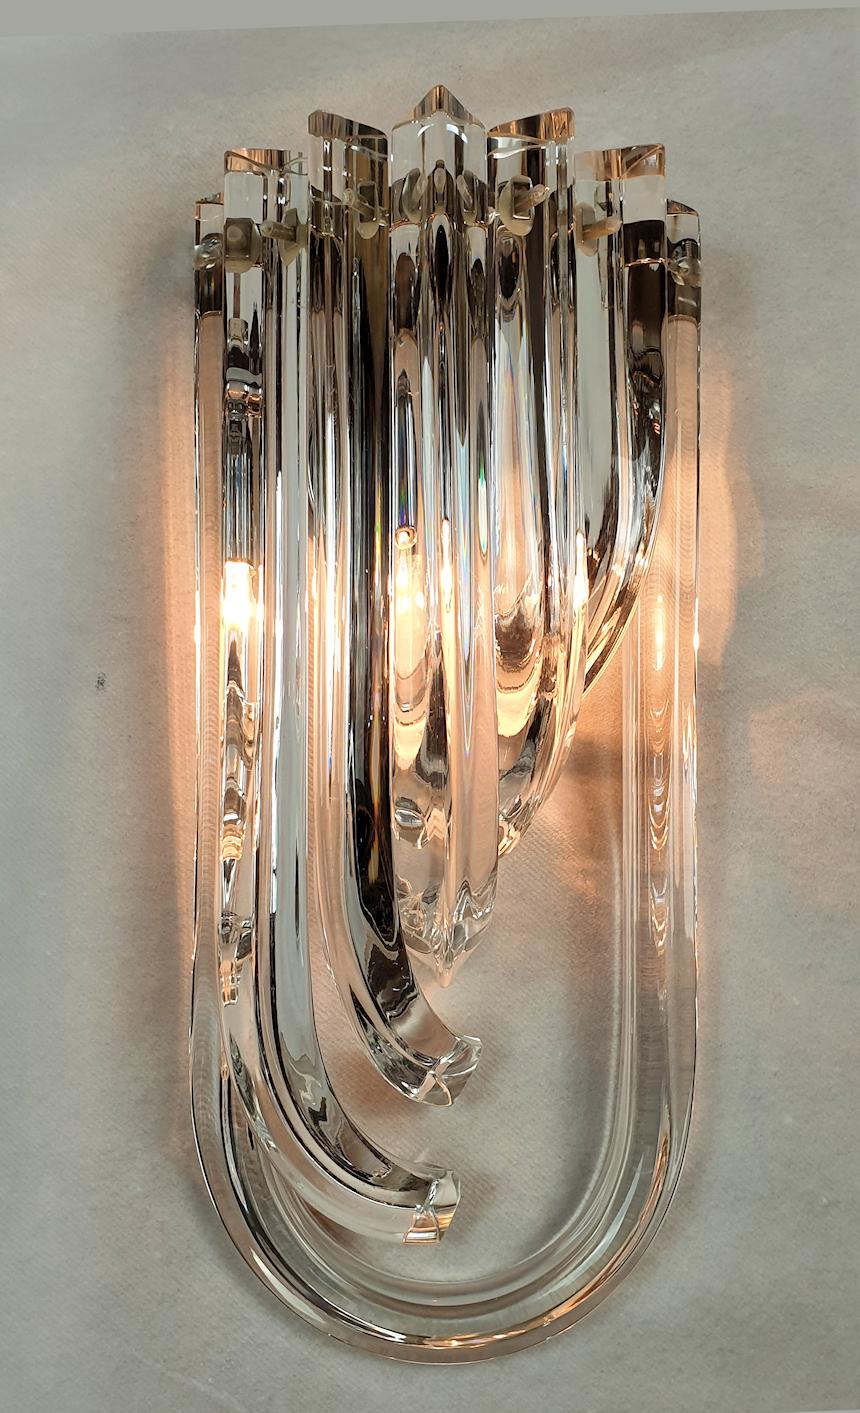 Hand-Crafted Curved Triedri Clear Murano Glass Sconces, Mid-Century Modern by Venini Italy